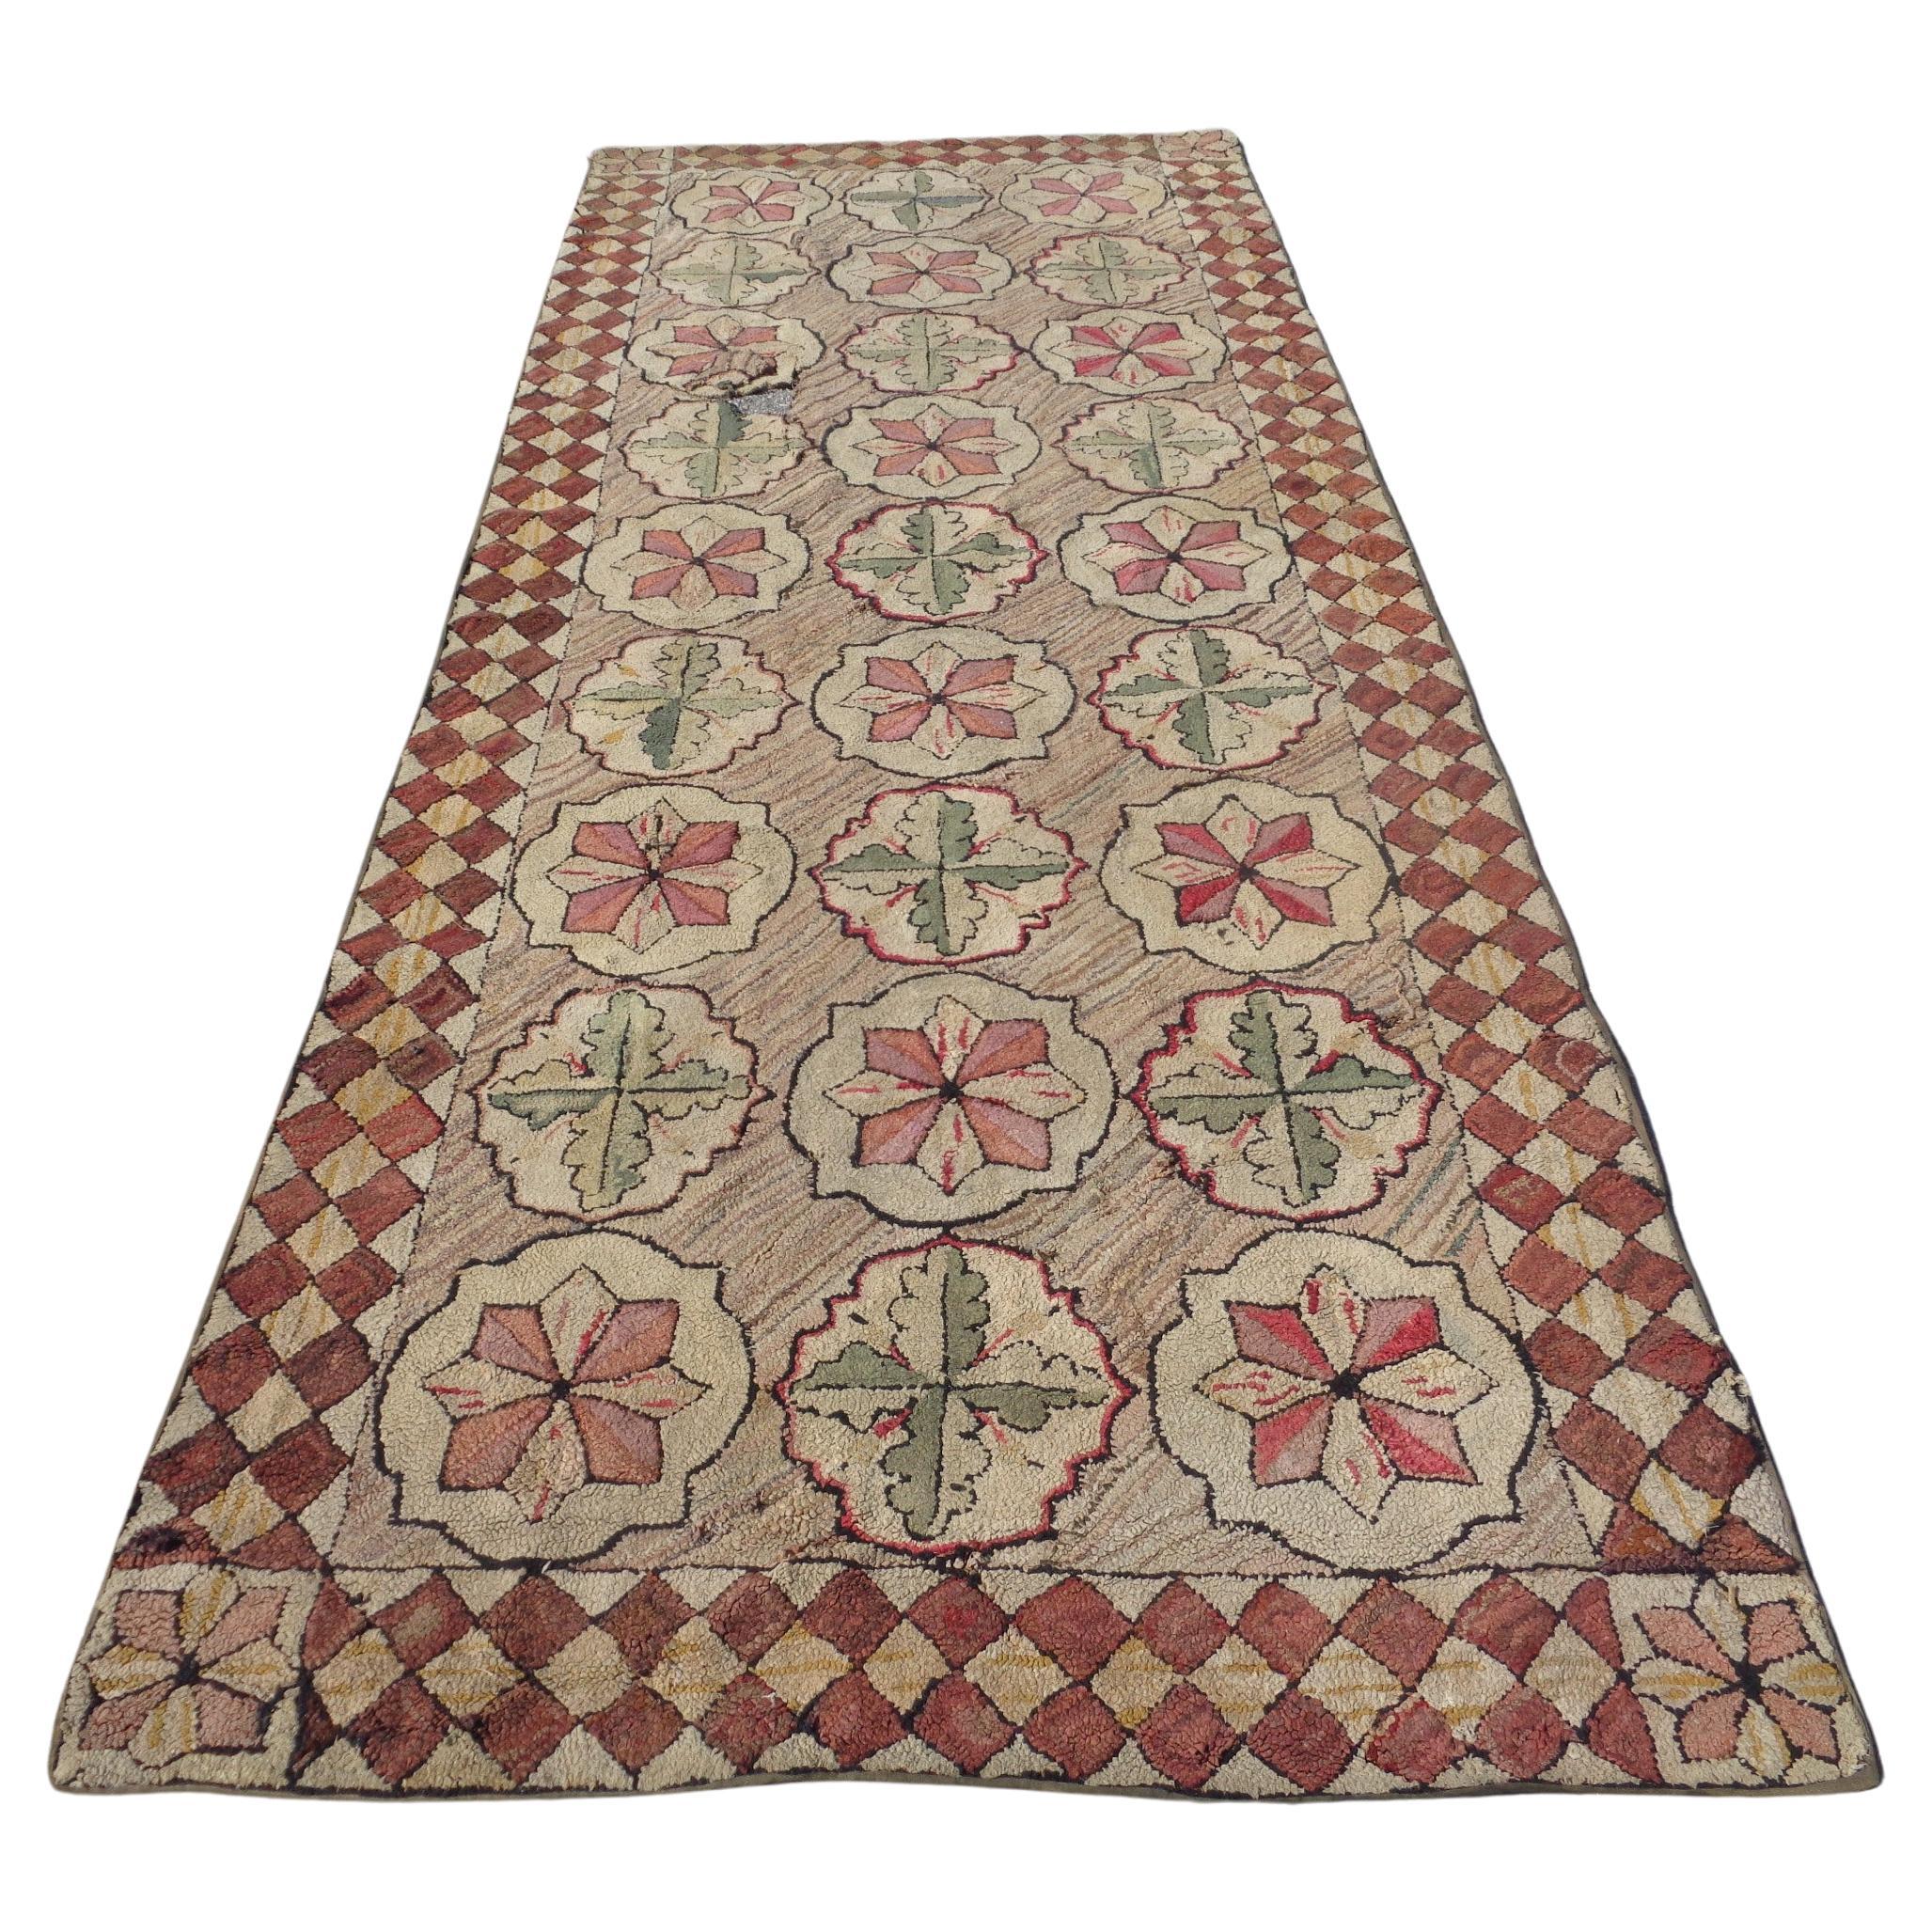 Antique American Hand Woven Hooked Rug Long Runner, Circa 1880-1900